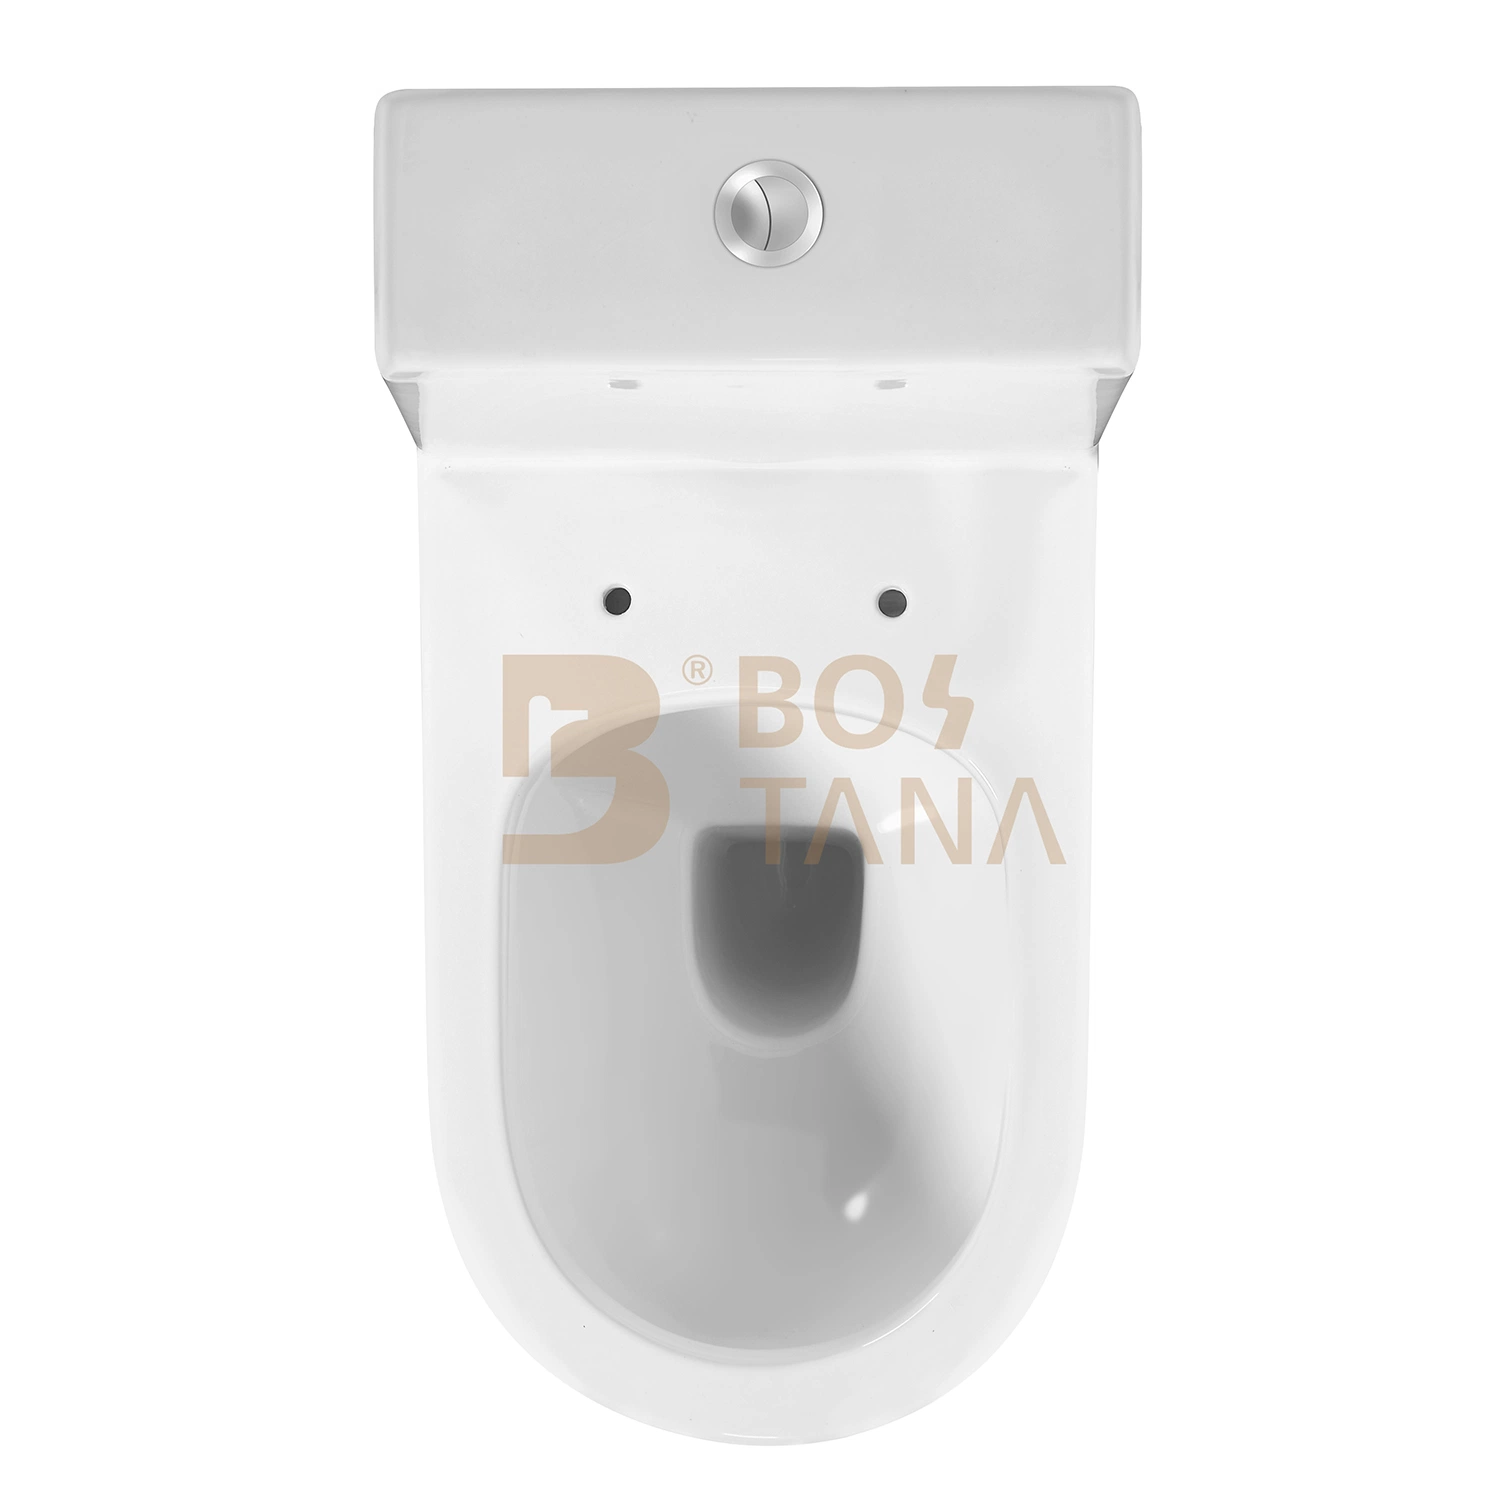 Bathroom Toilet High Cost-Effective Toilet with UF/PP Seat Cover Sanitaryware Toilet